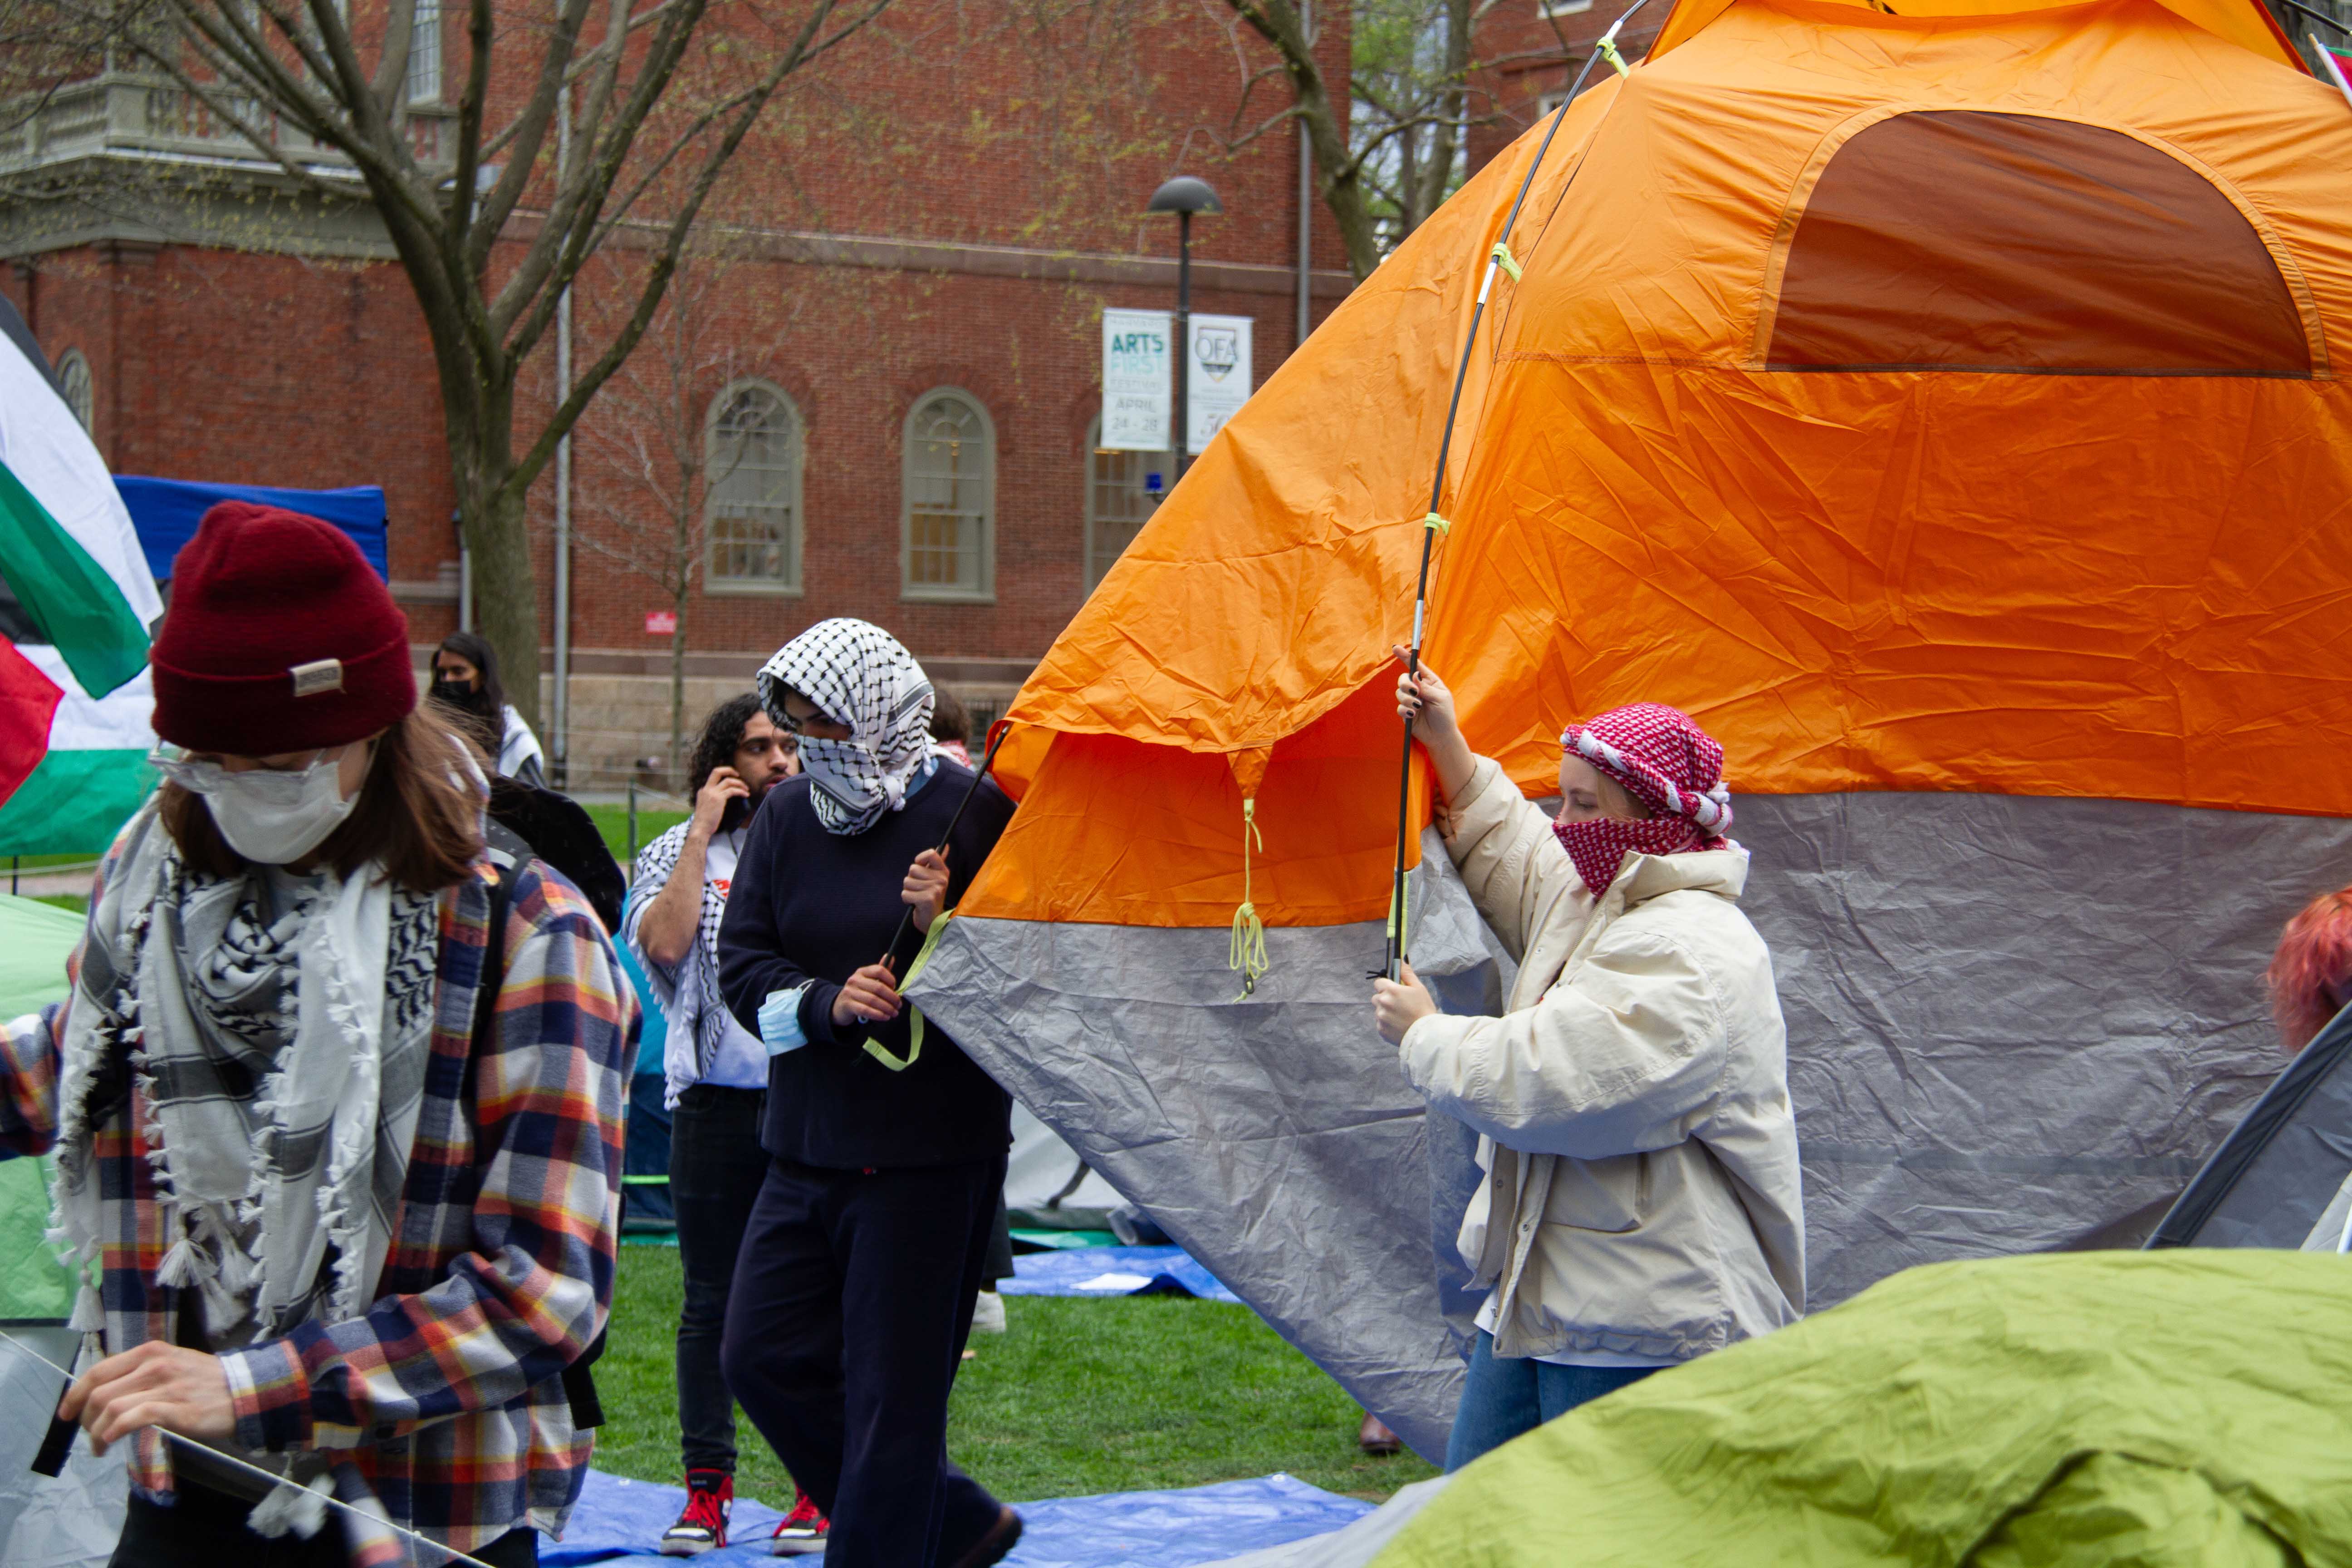 Pro-Palestine students occupied Harvard Yard in an encampment, demanding the University sever ties with Israeli institutions and companies  and protesting the College’s suspension of the Palestine Solidarity Committee. The encampment at Harvard came amid a nationwide surge of similar demonstrations across college and university campuses, including Columbia, Yale, and MIT.